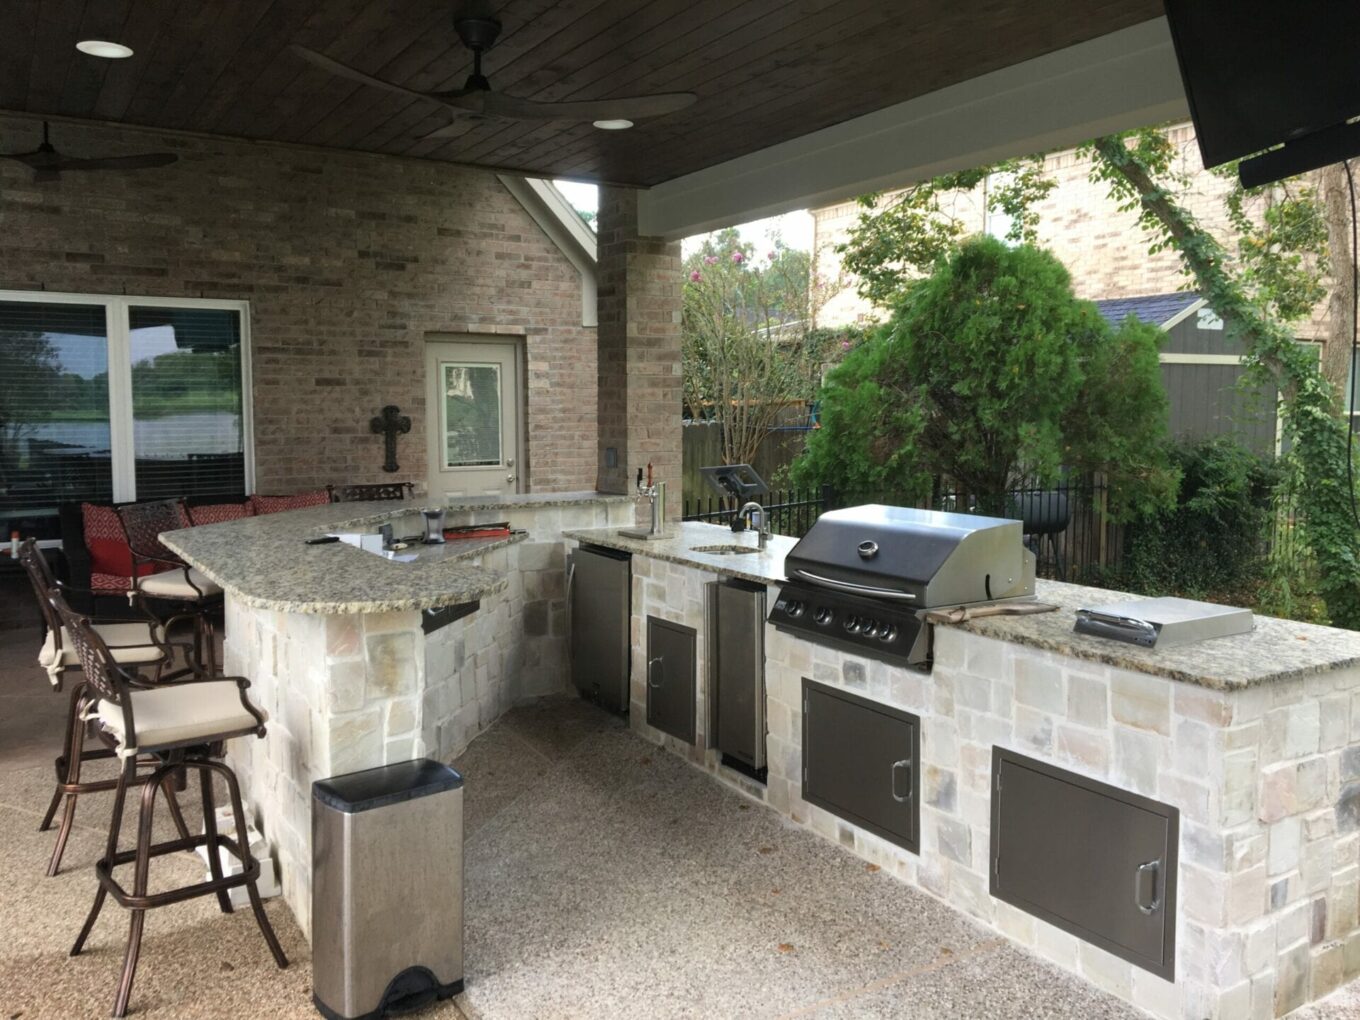 A large outdoor kitchen with an island and grill.